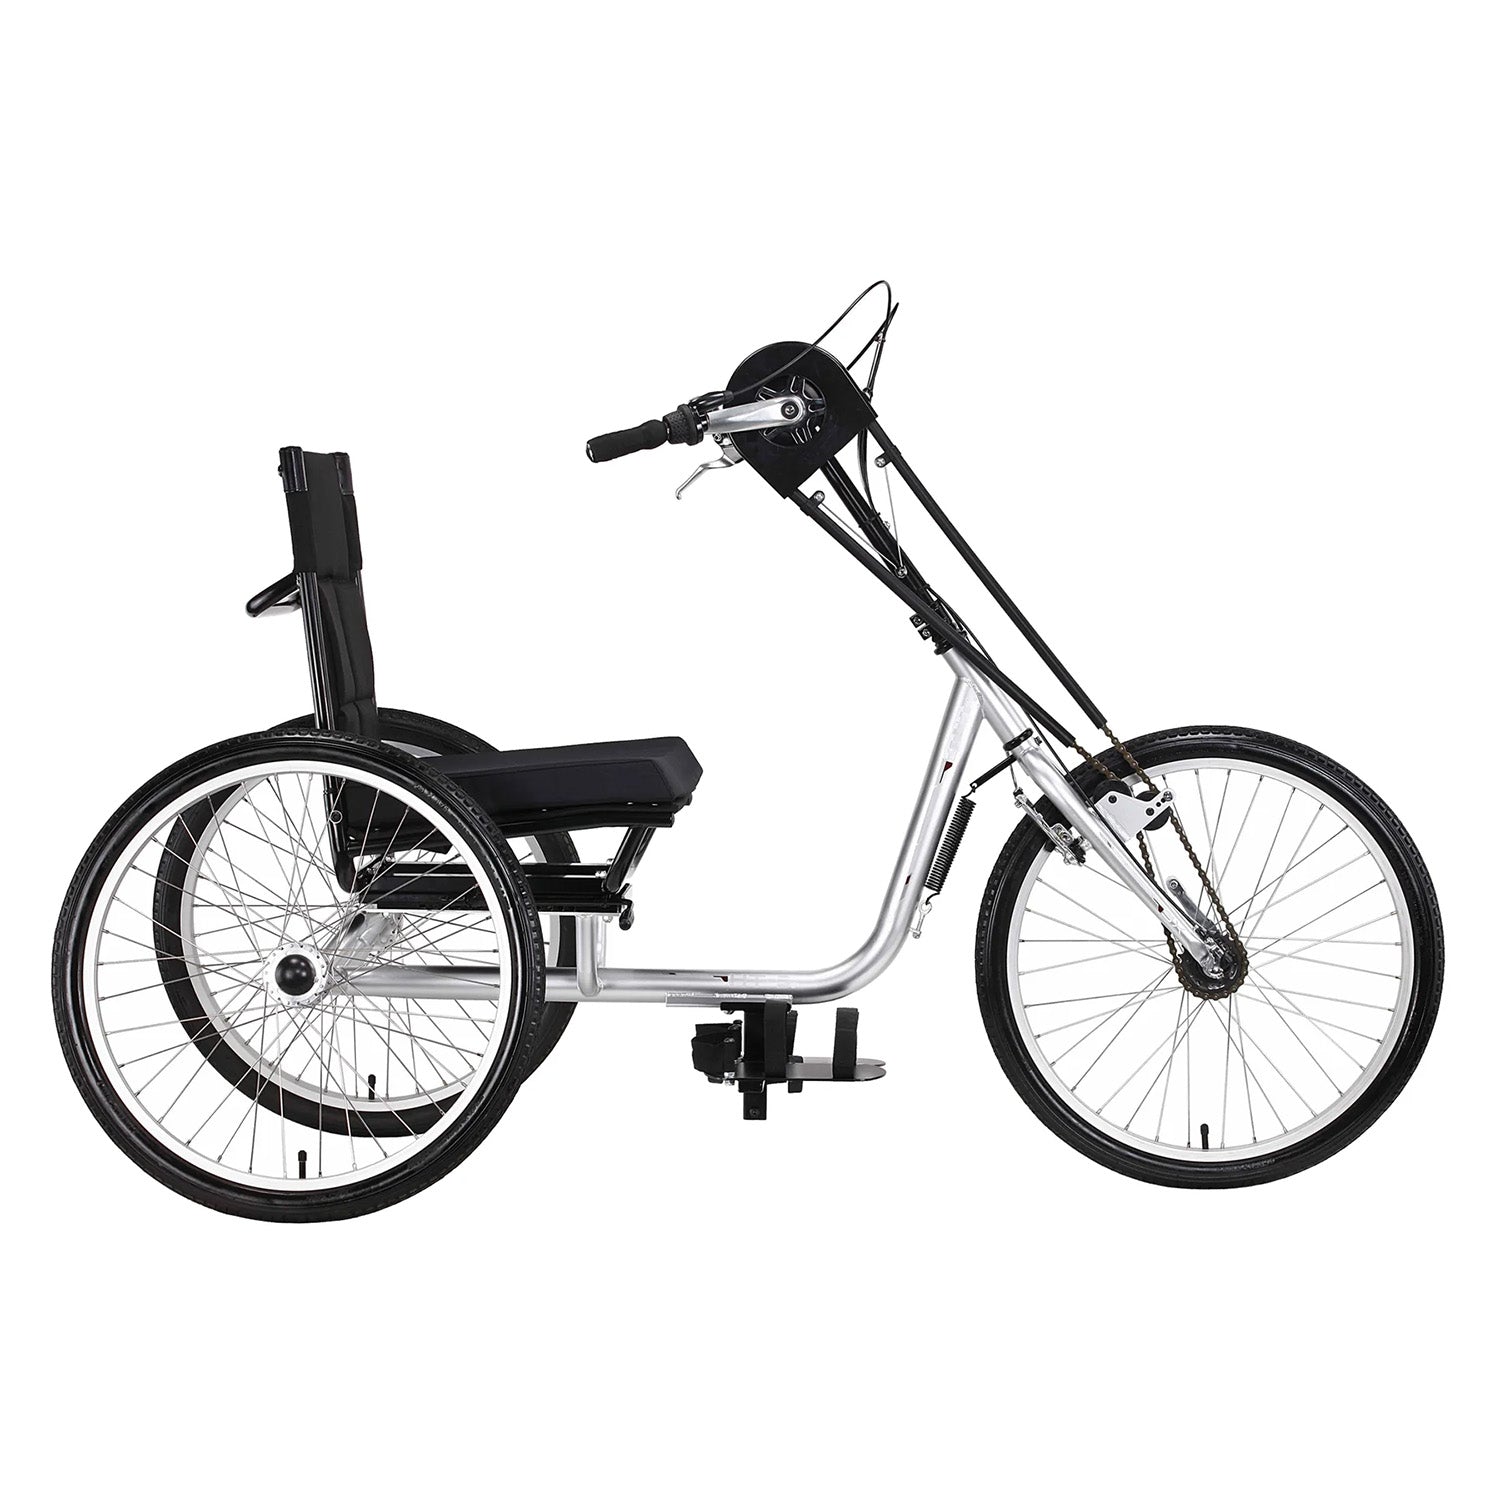 Sun Bicycle Hand Trike, designed for person with disabilities, Silver, Bixby Bicycles, Oklahoma